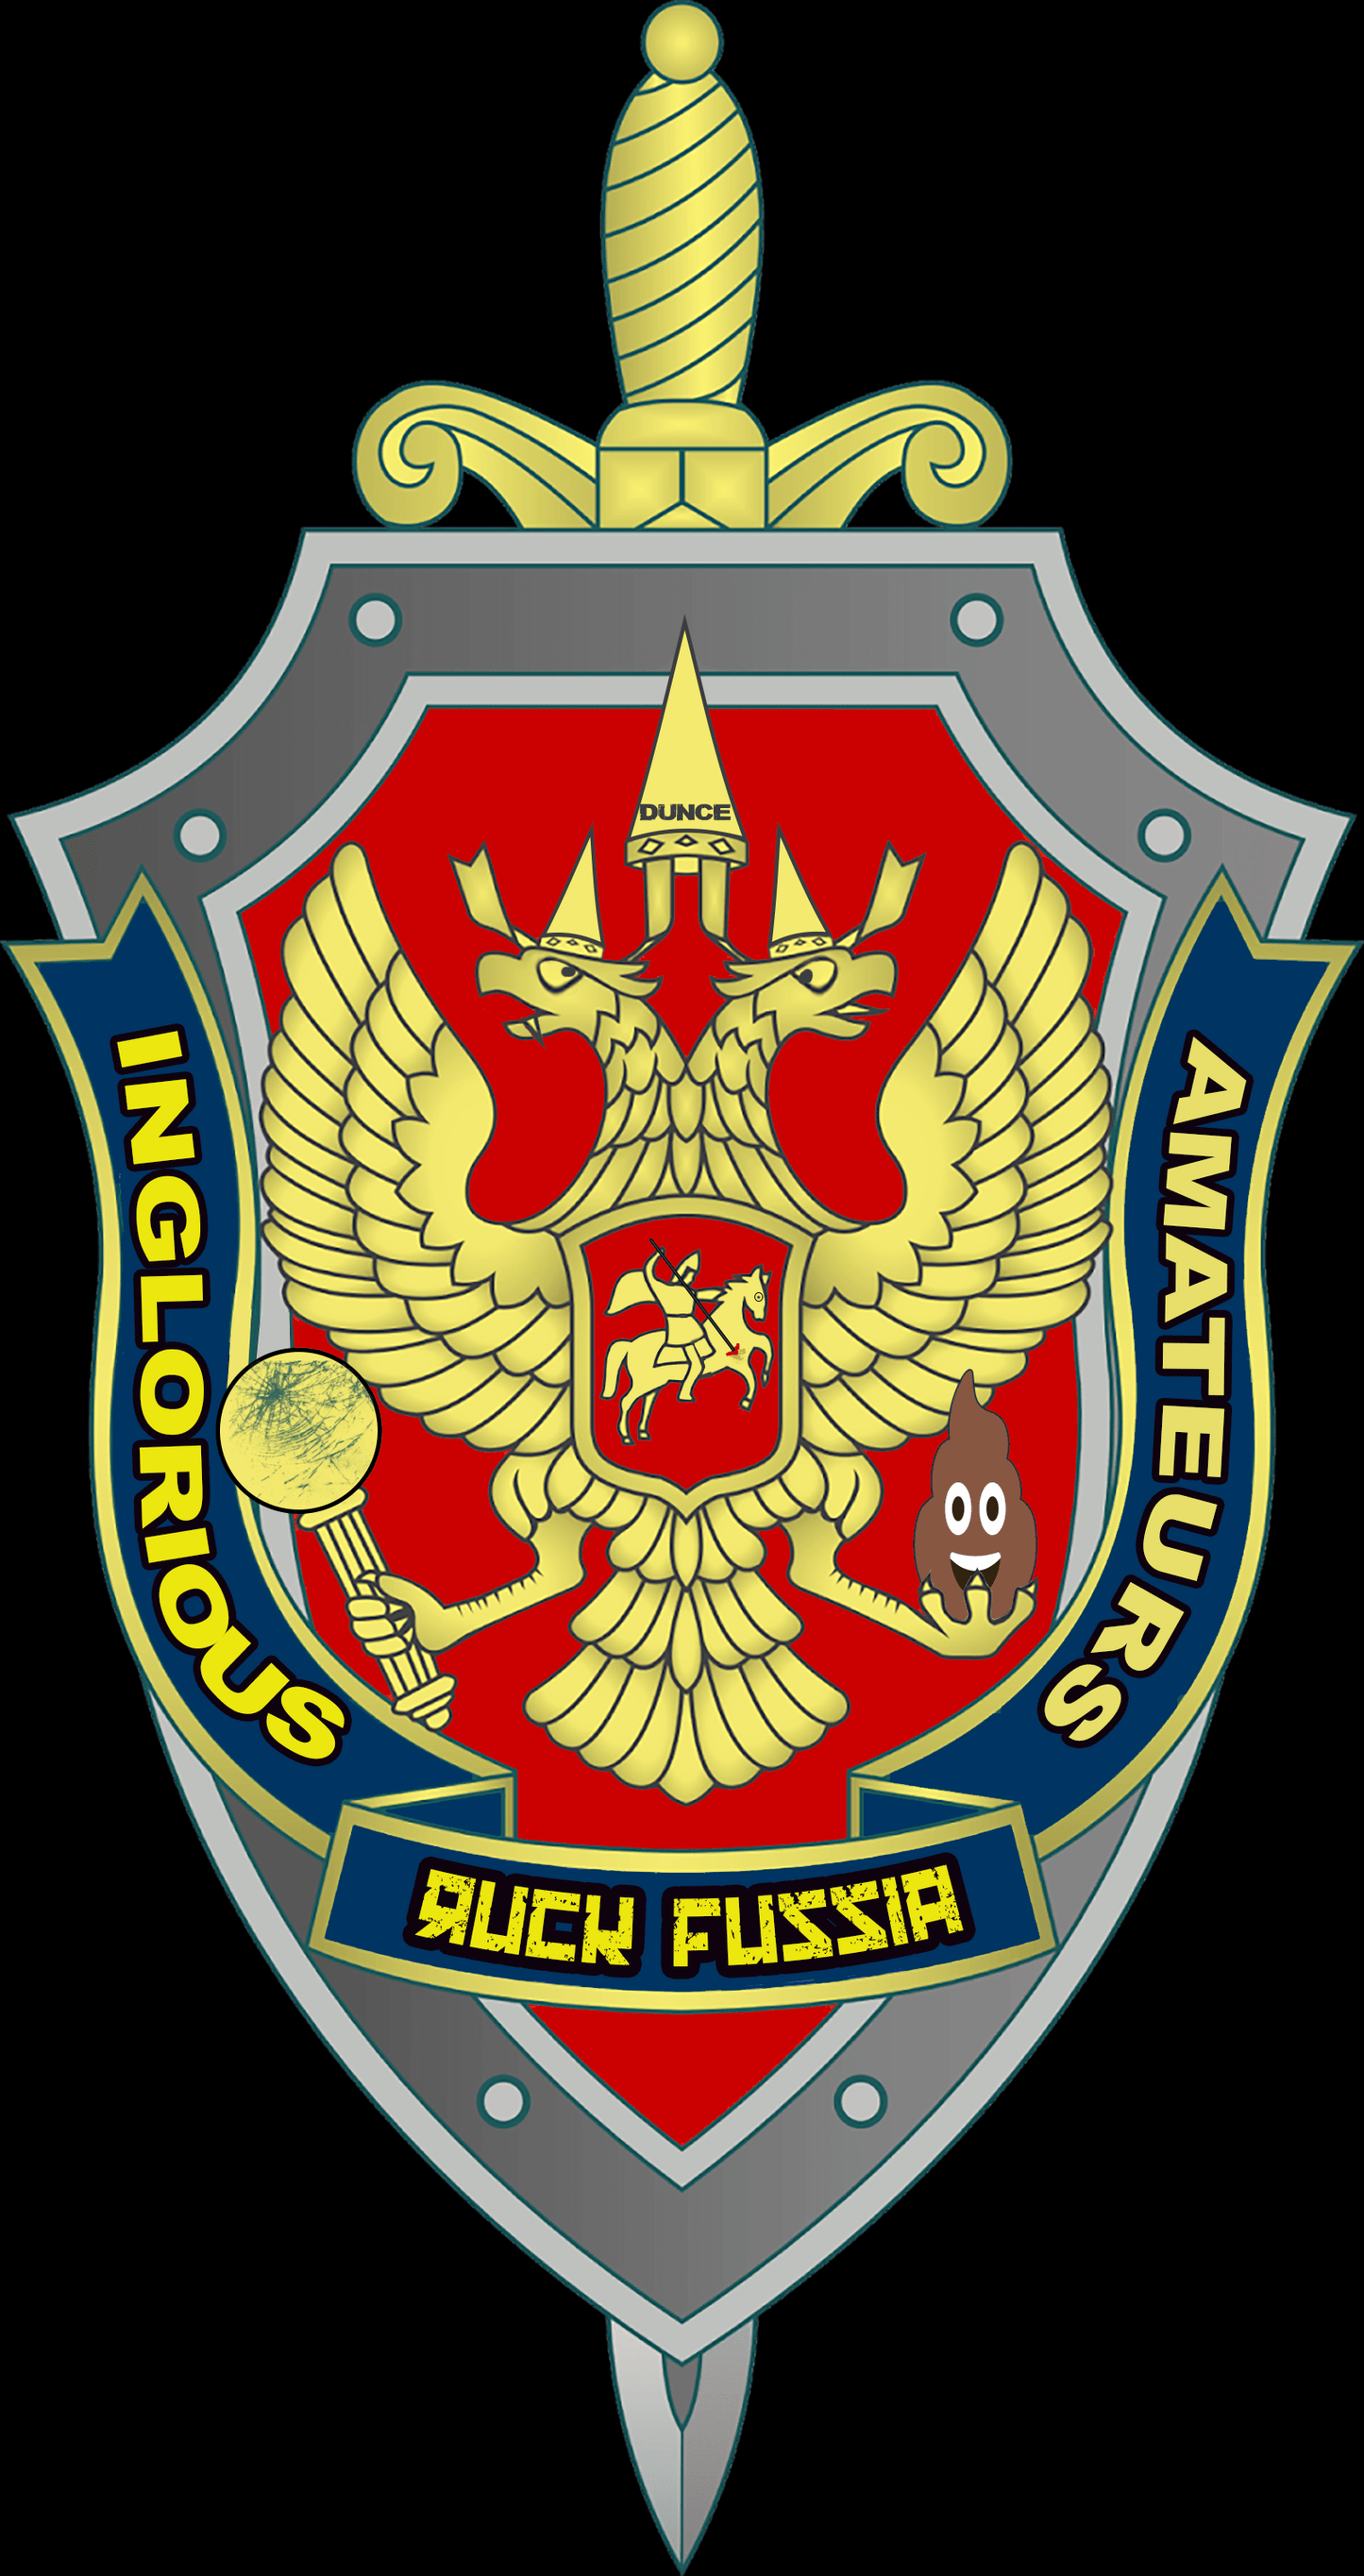 Ruck Fussia Gravity - Inglorious Amateurs